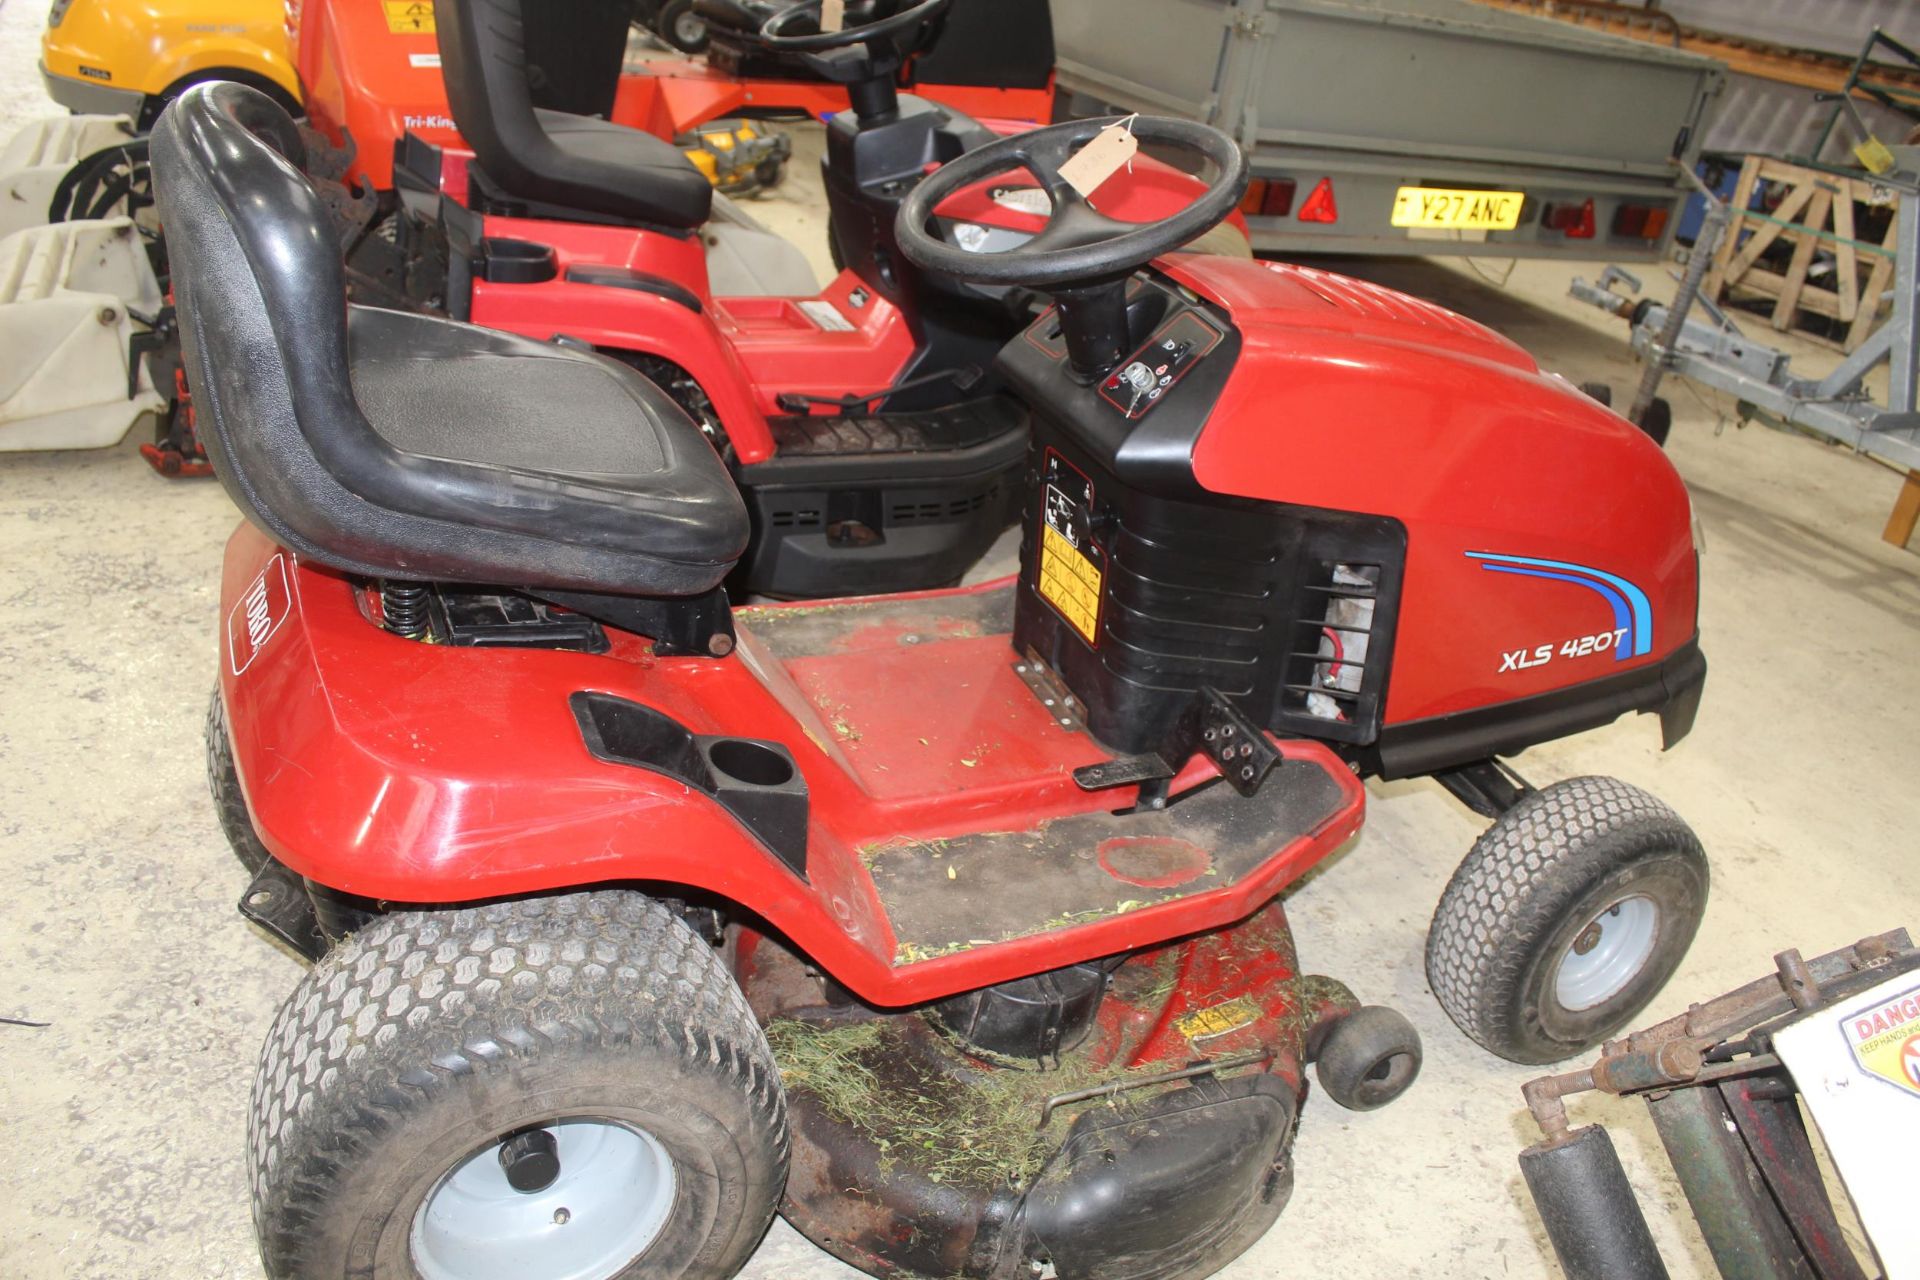 MTD CUB CADET RIDE ON MOWER WITH BRIGGS & STRATTON VANGUARD V-TWIN 20HP ENGINE + VAT KEY IN OFFICE - Image 6 of 6